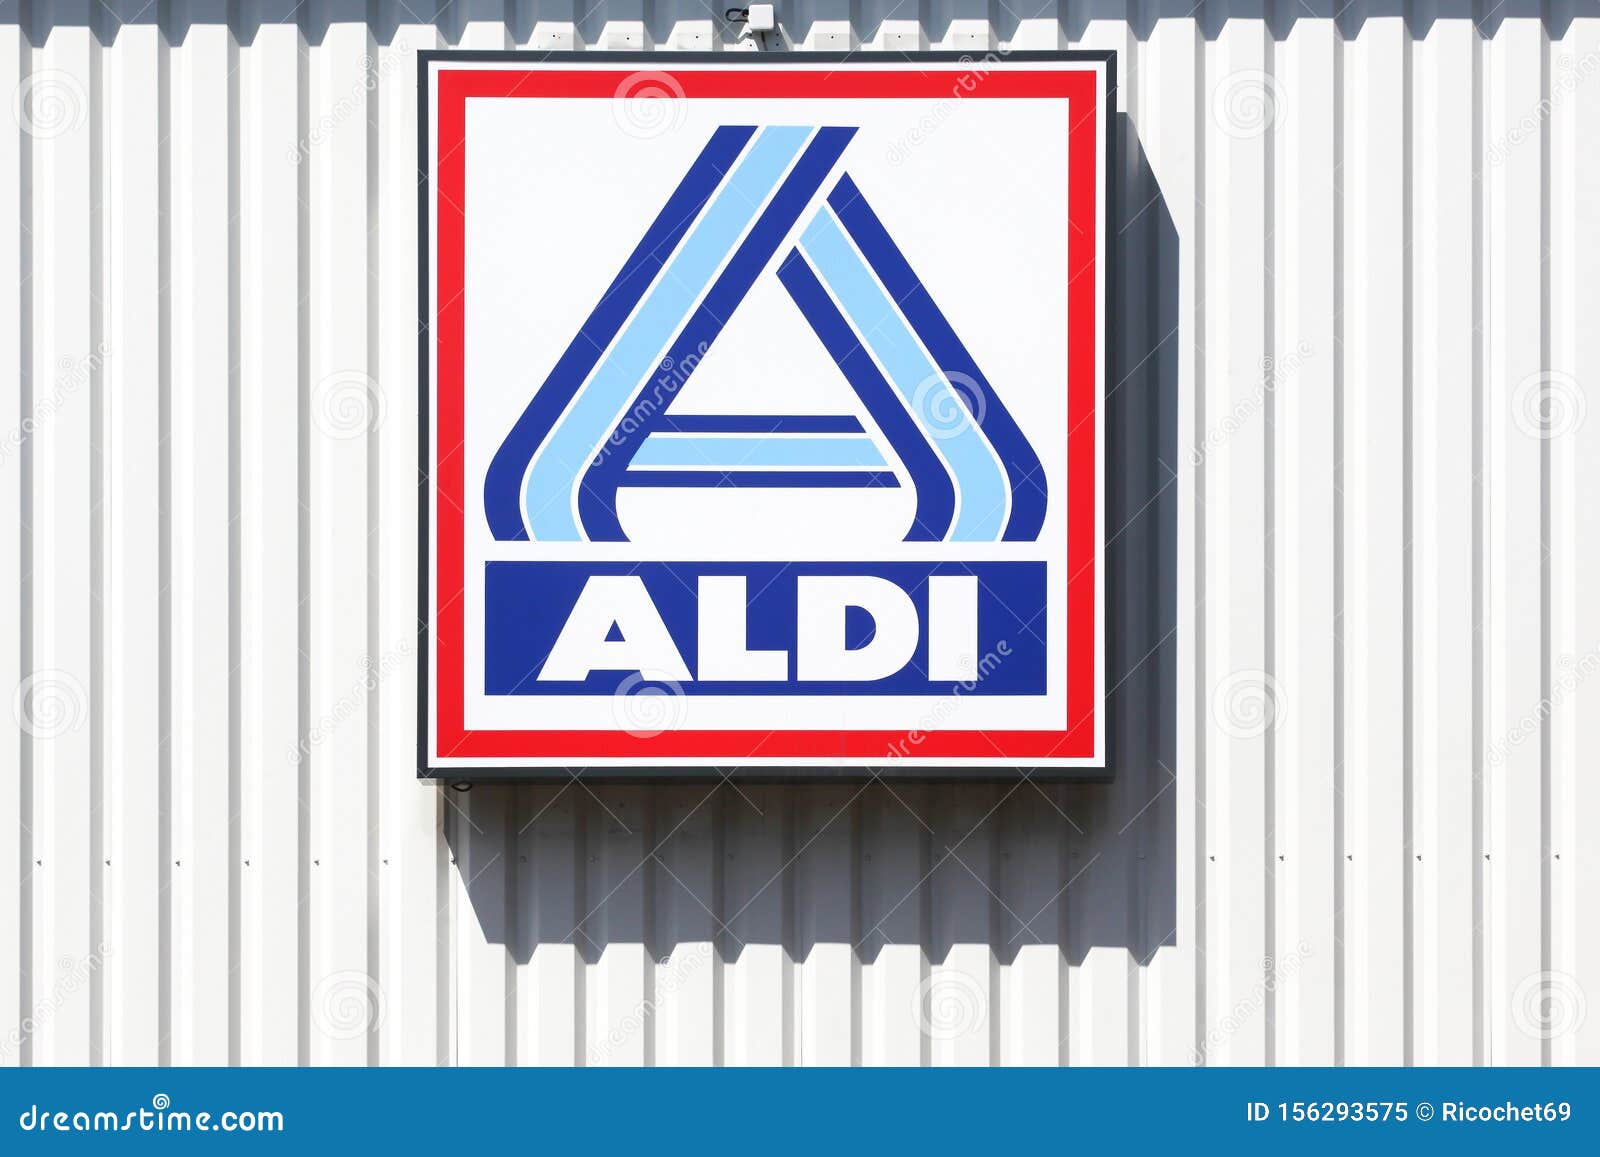 Aldi Logo On A Wall Editorial Image Image Of Food Shop 156293575